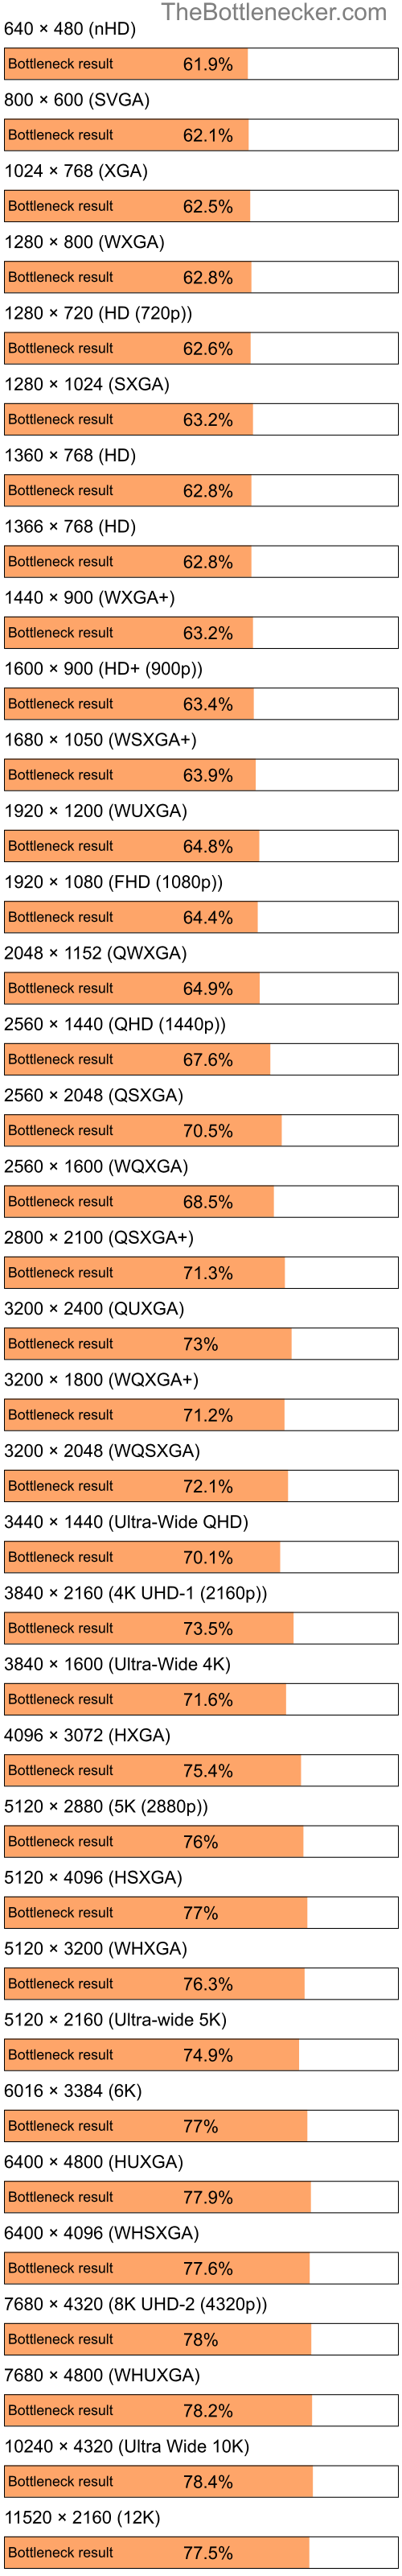 Bottleneck results by resolution for Intel Celeron M 420 and NVIDIA Quadro FX 570M in General Tasks